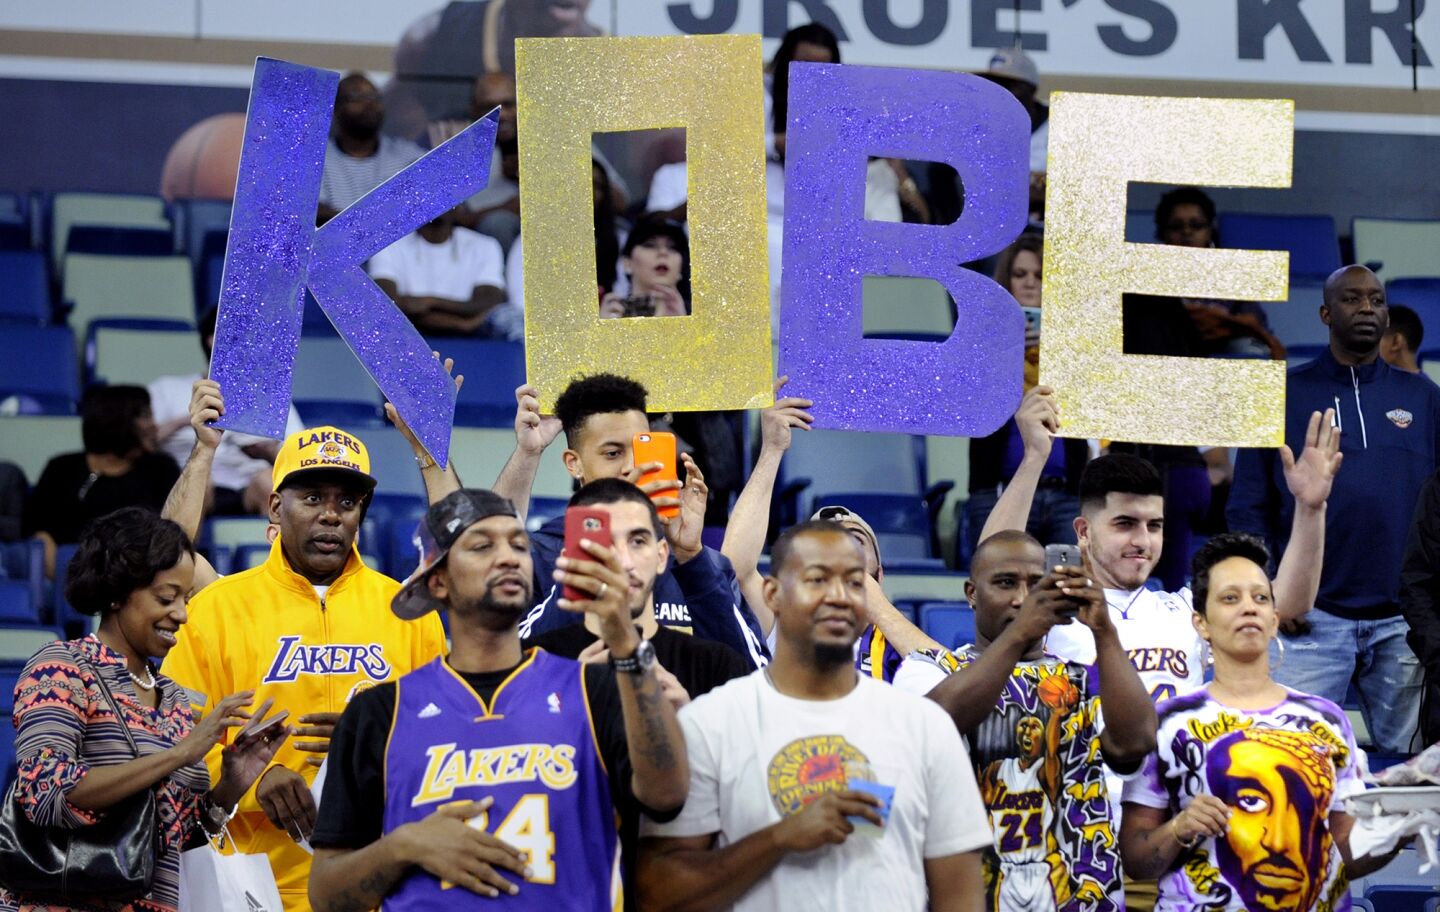 Fans hold a 'KOBE' sign as the Lakers take the court at Smoothie King Center in New Orleans.